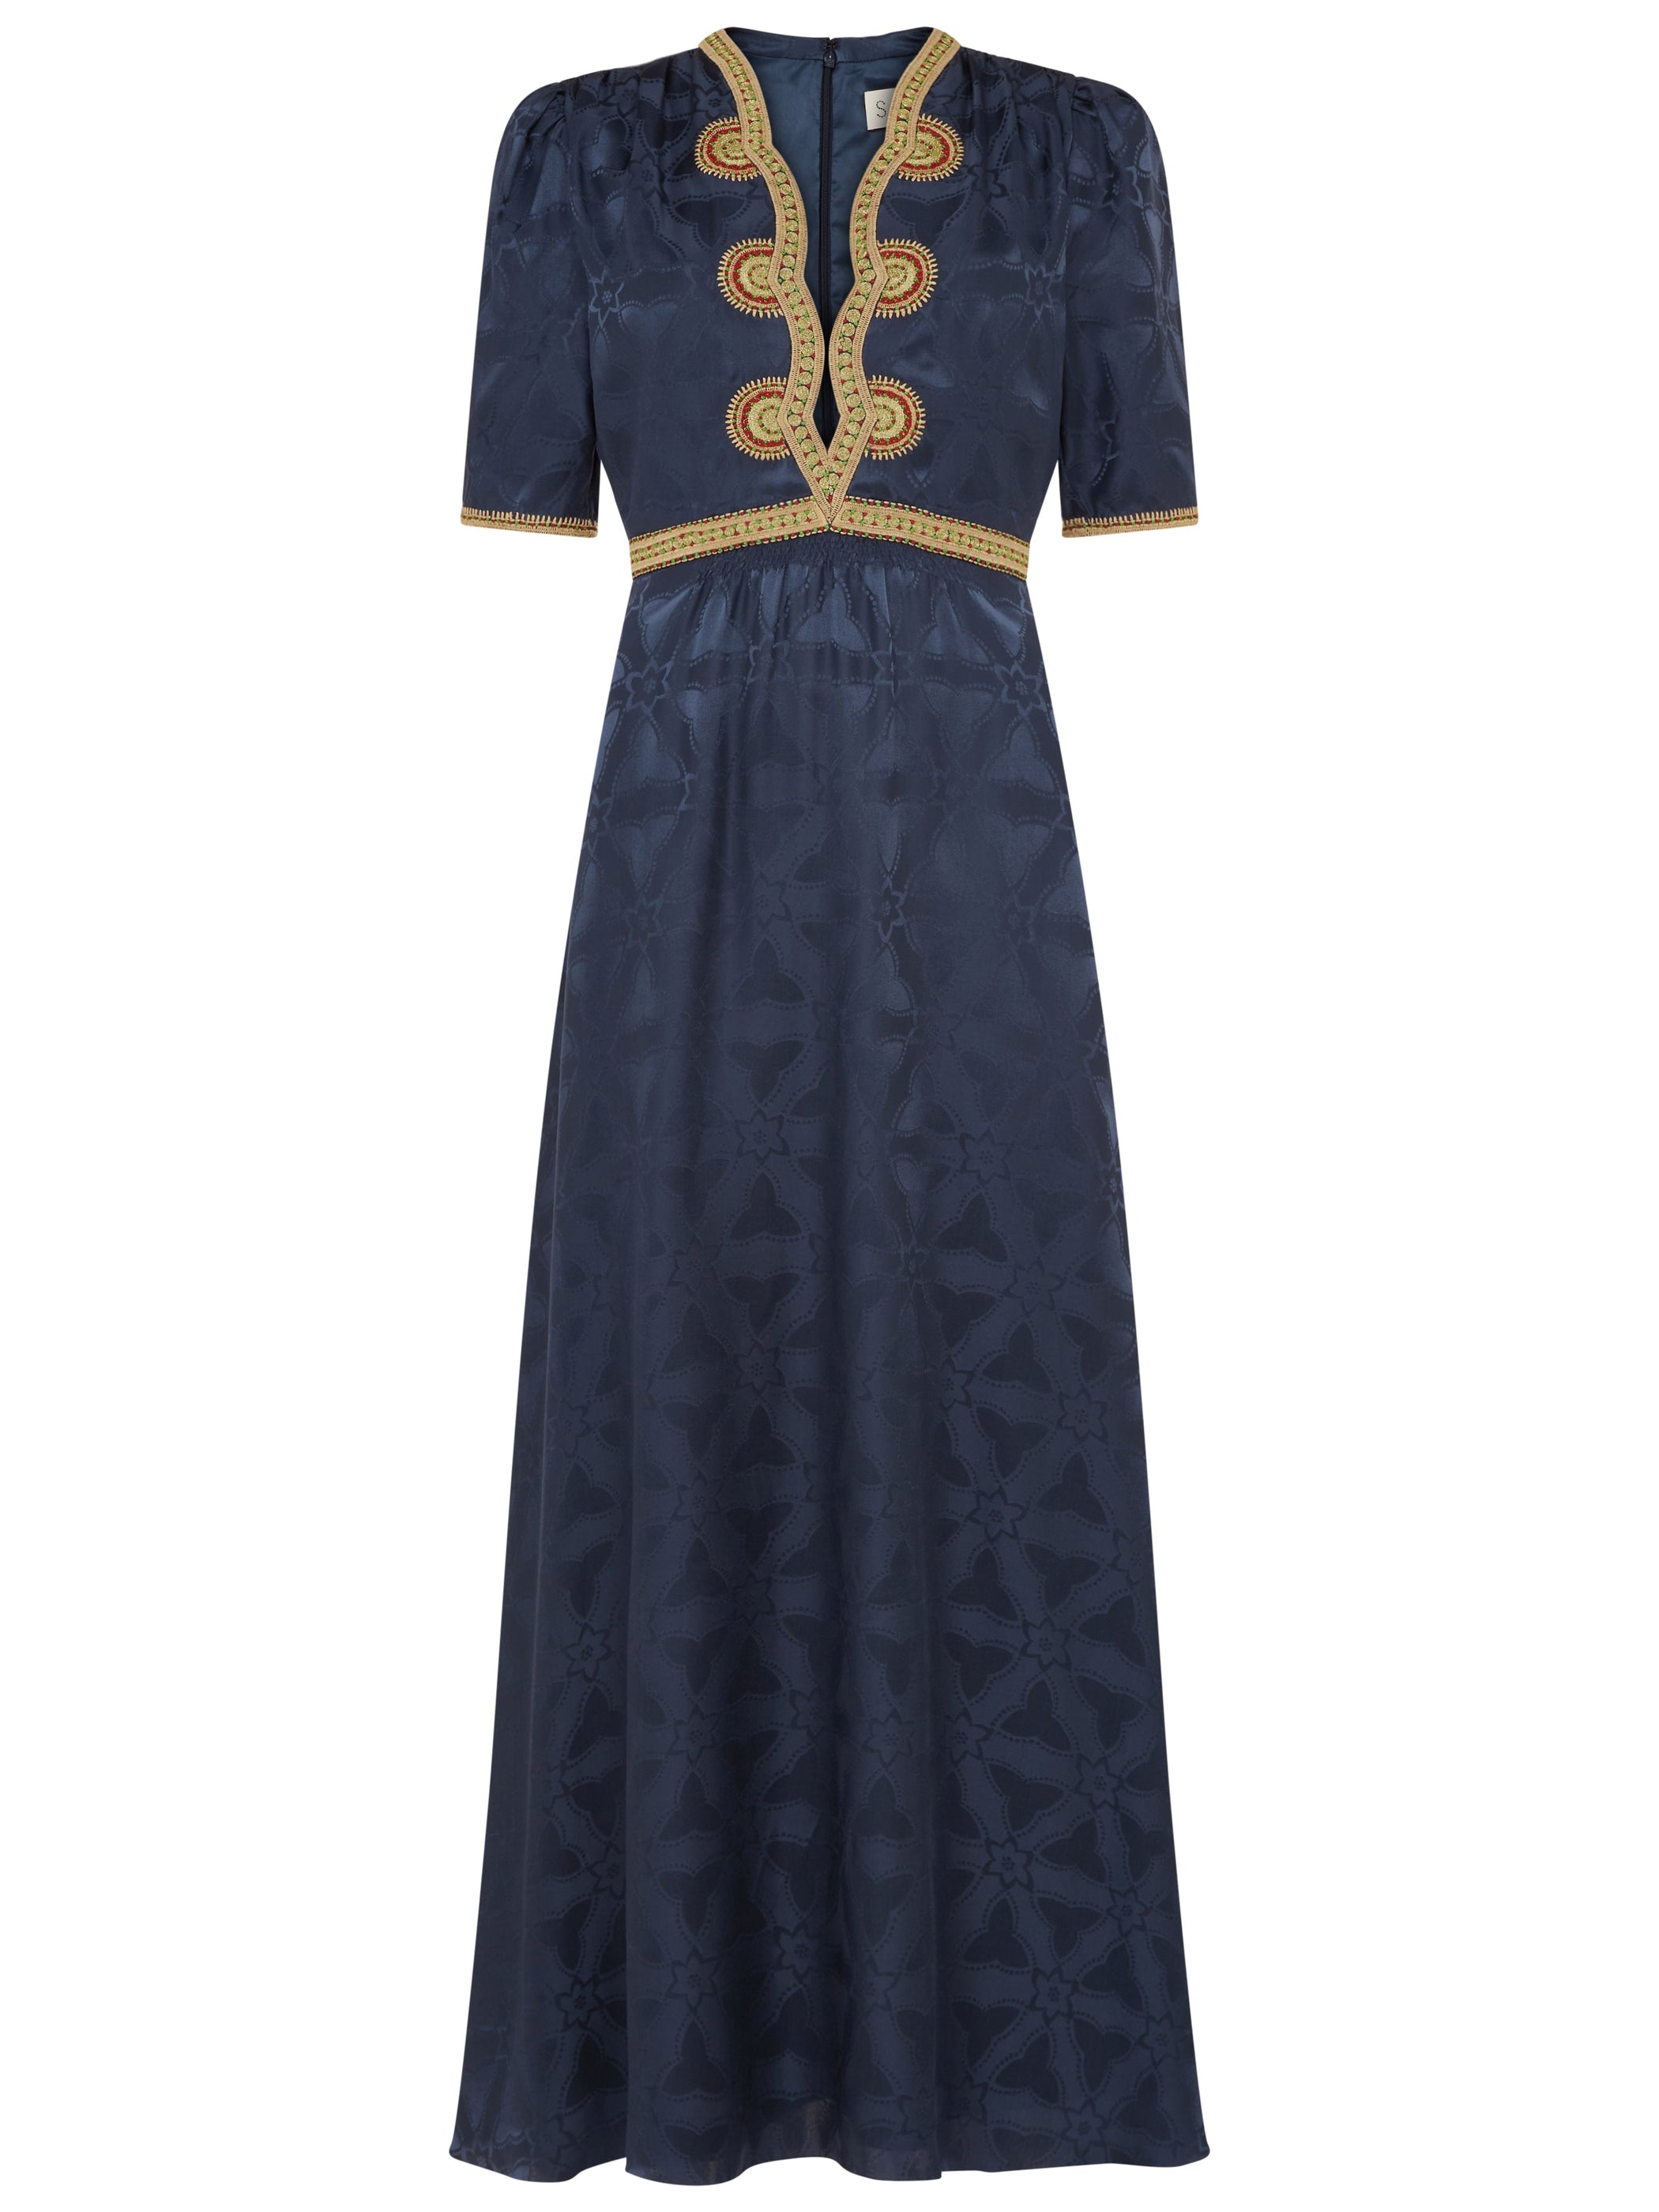 Tabitha Dress in Navy with Ornate Embroidery